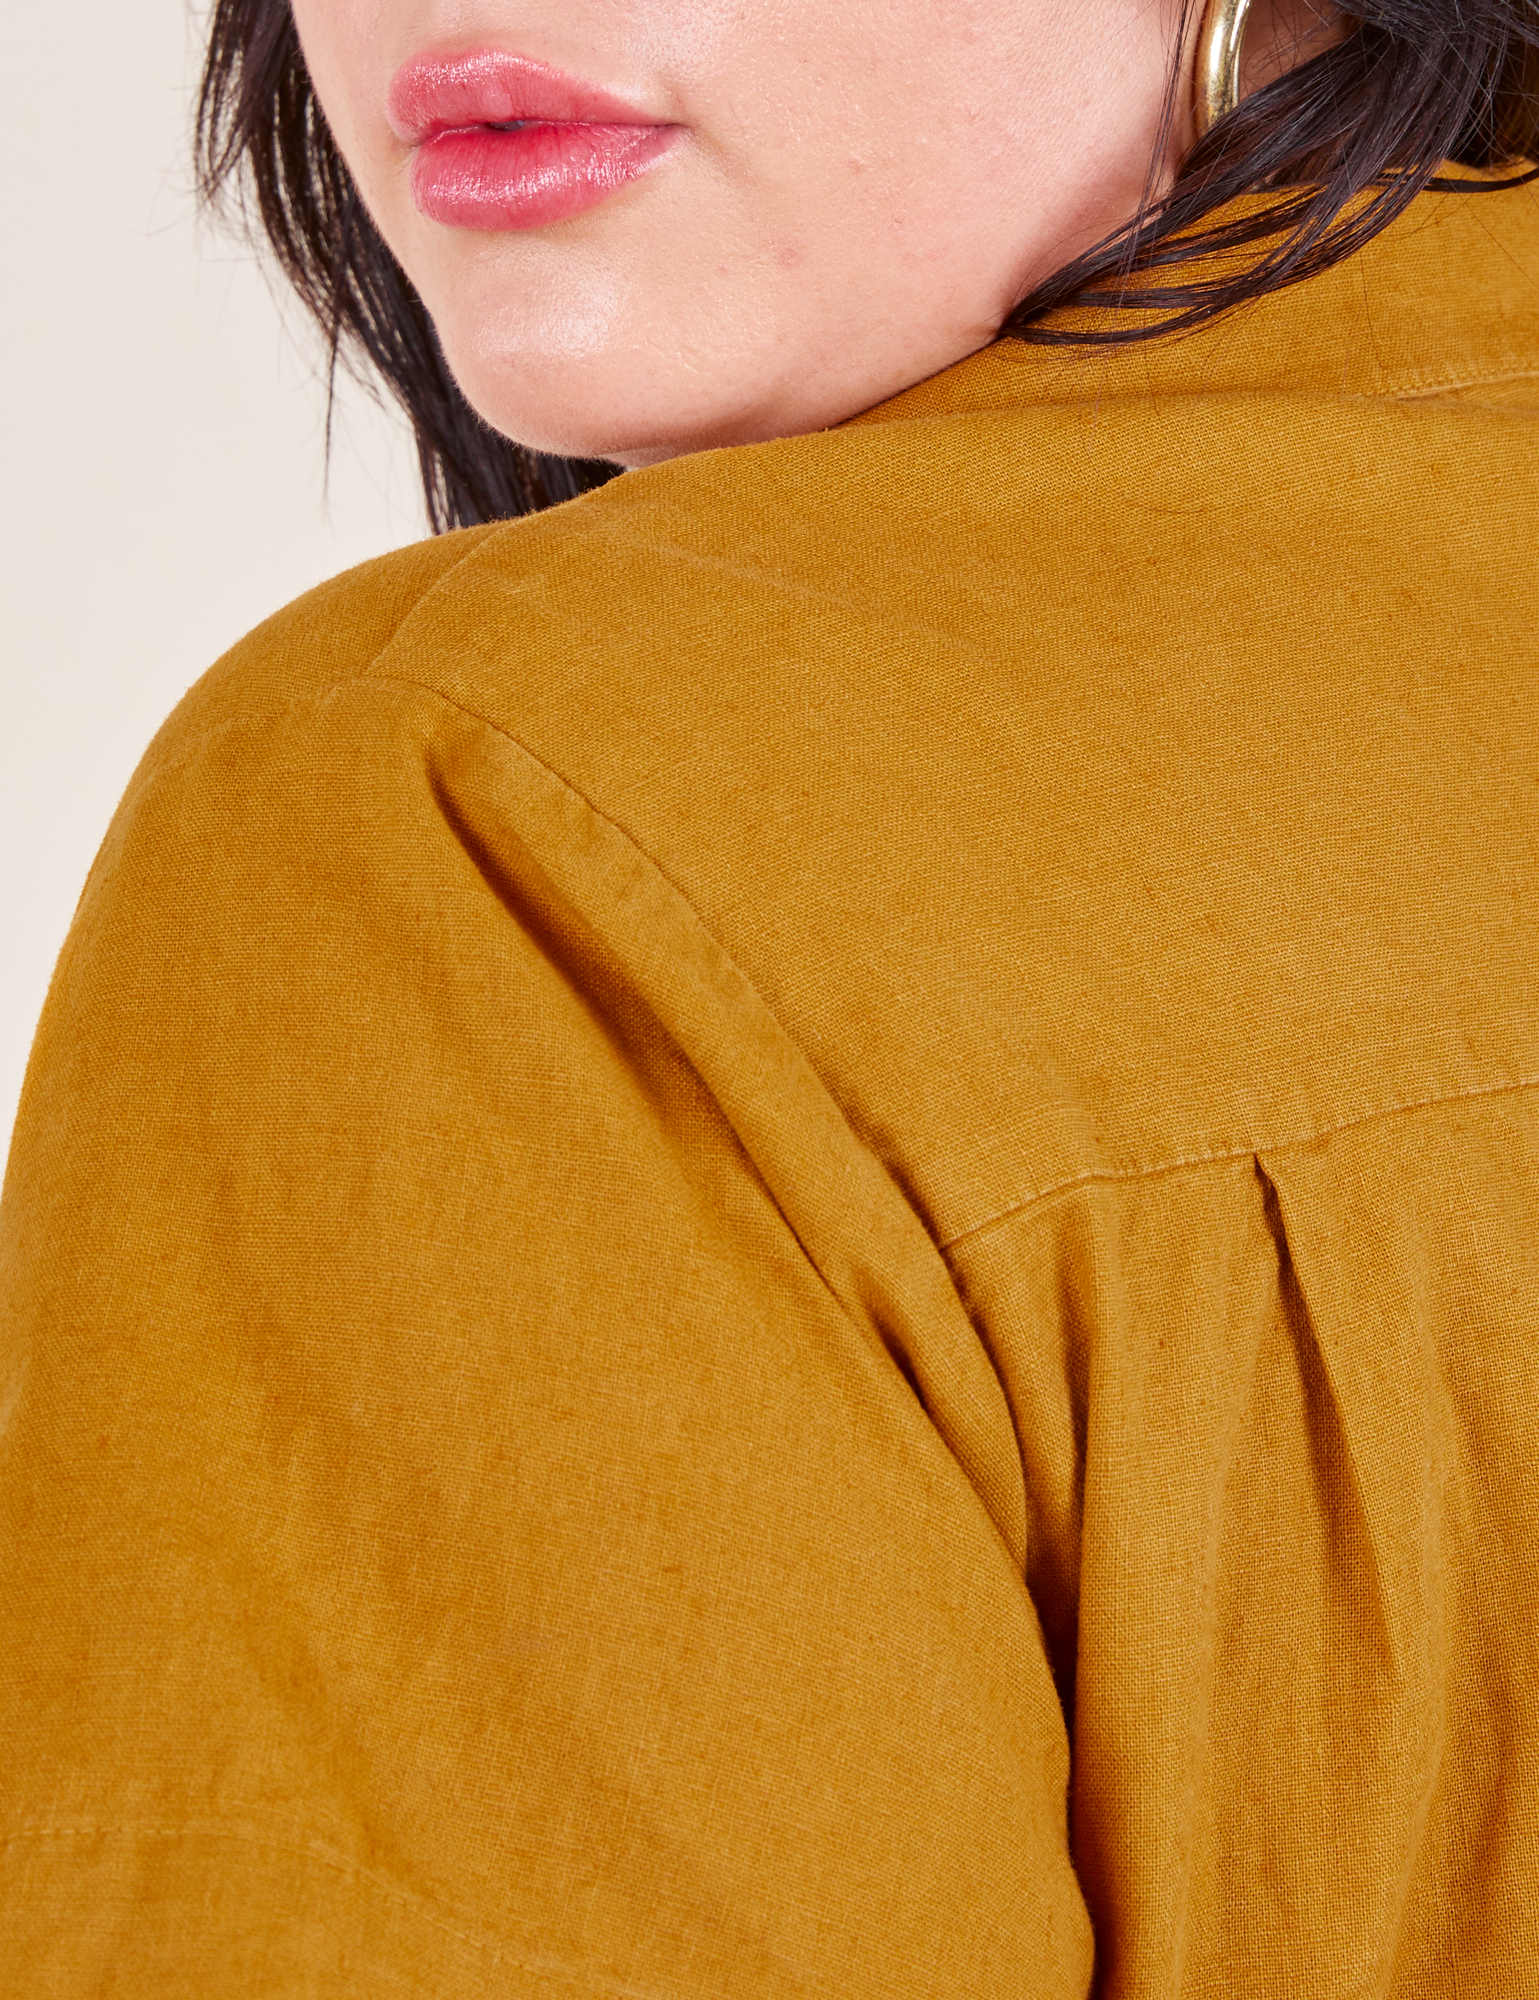 Pantry Button-Up in Spicy Mustard back view shoulder close up on Faye